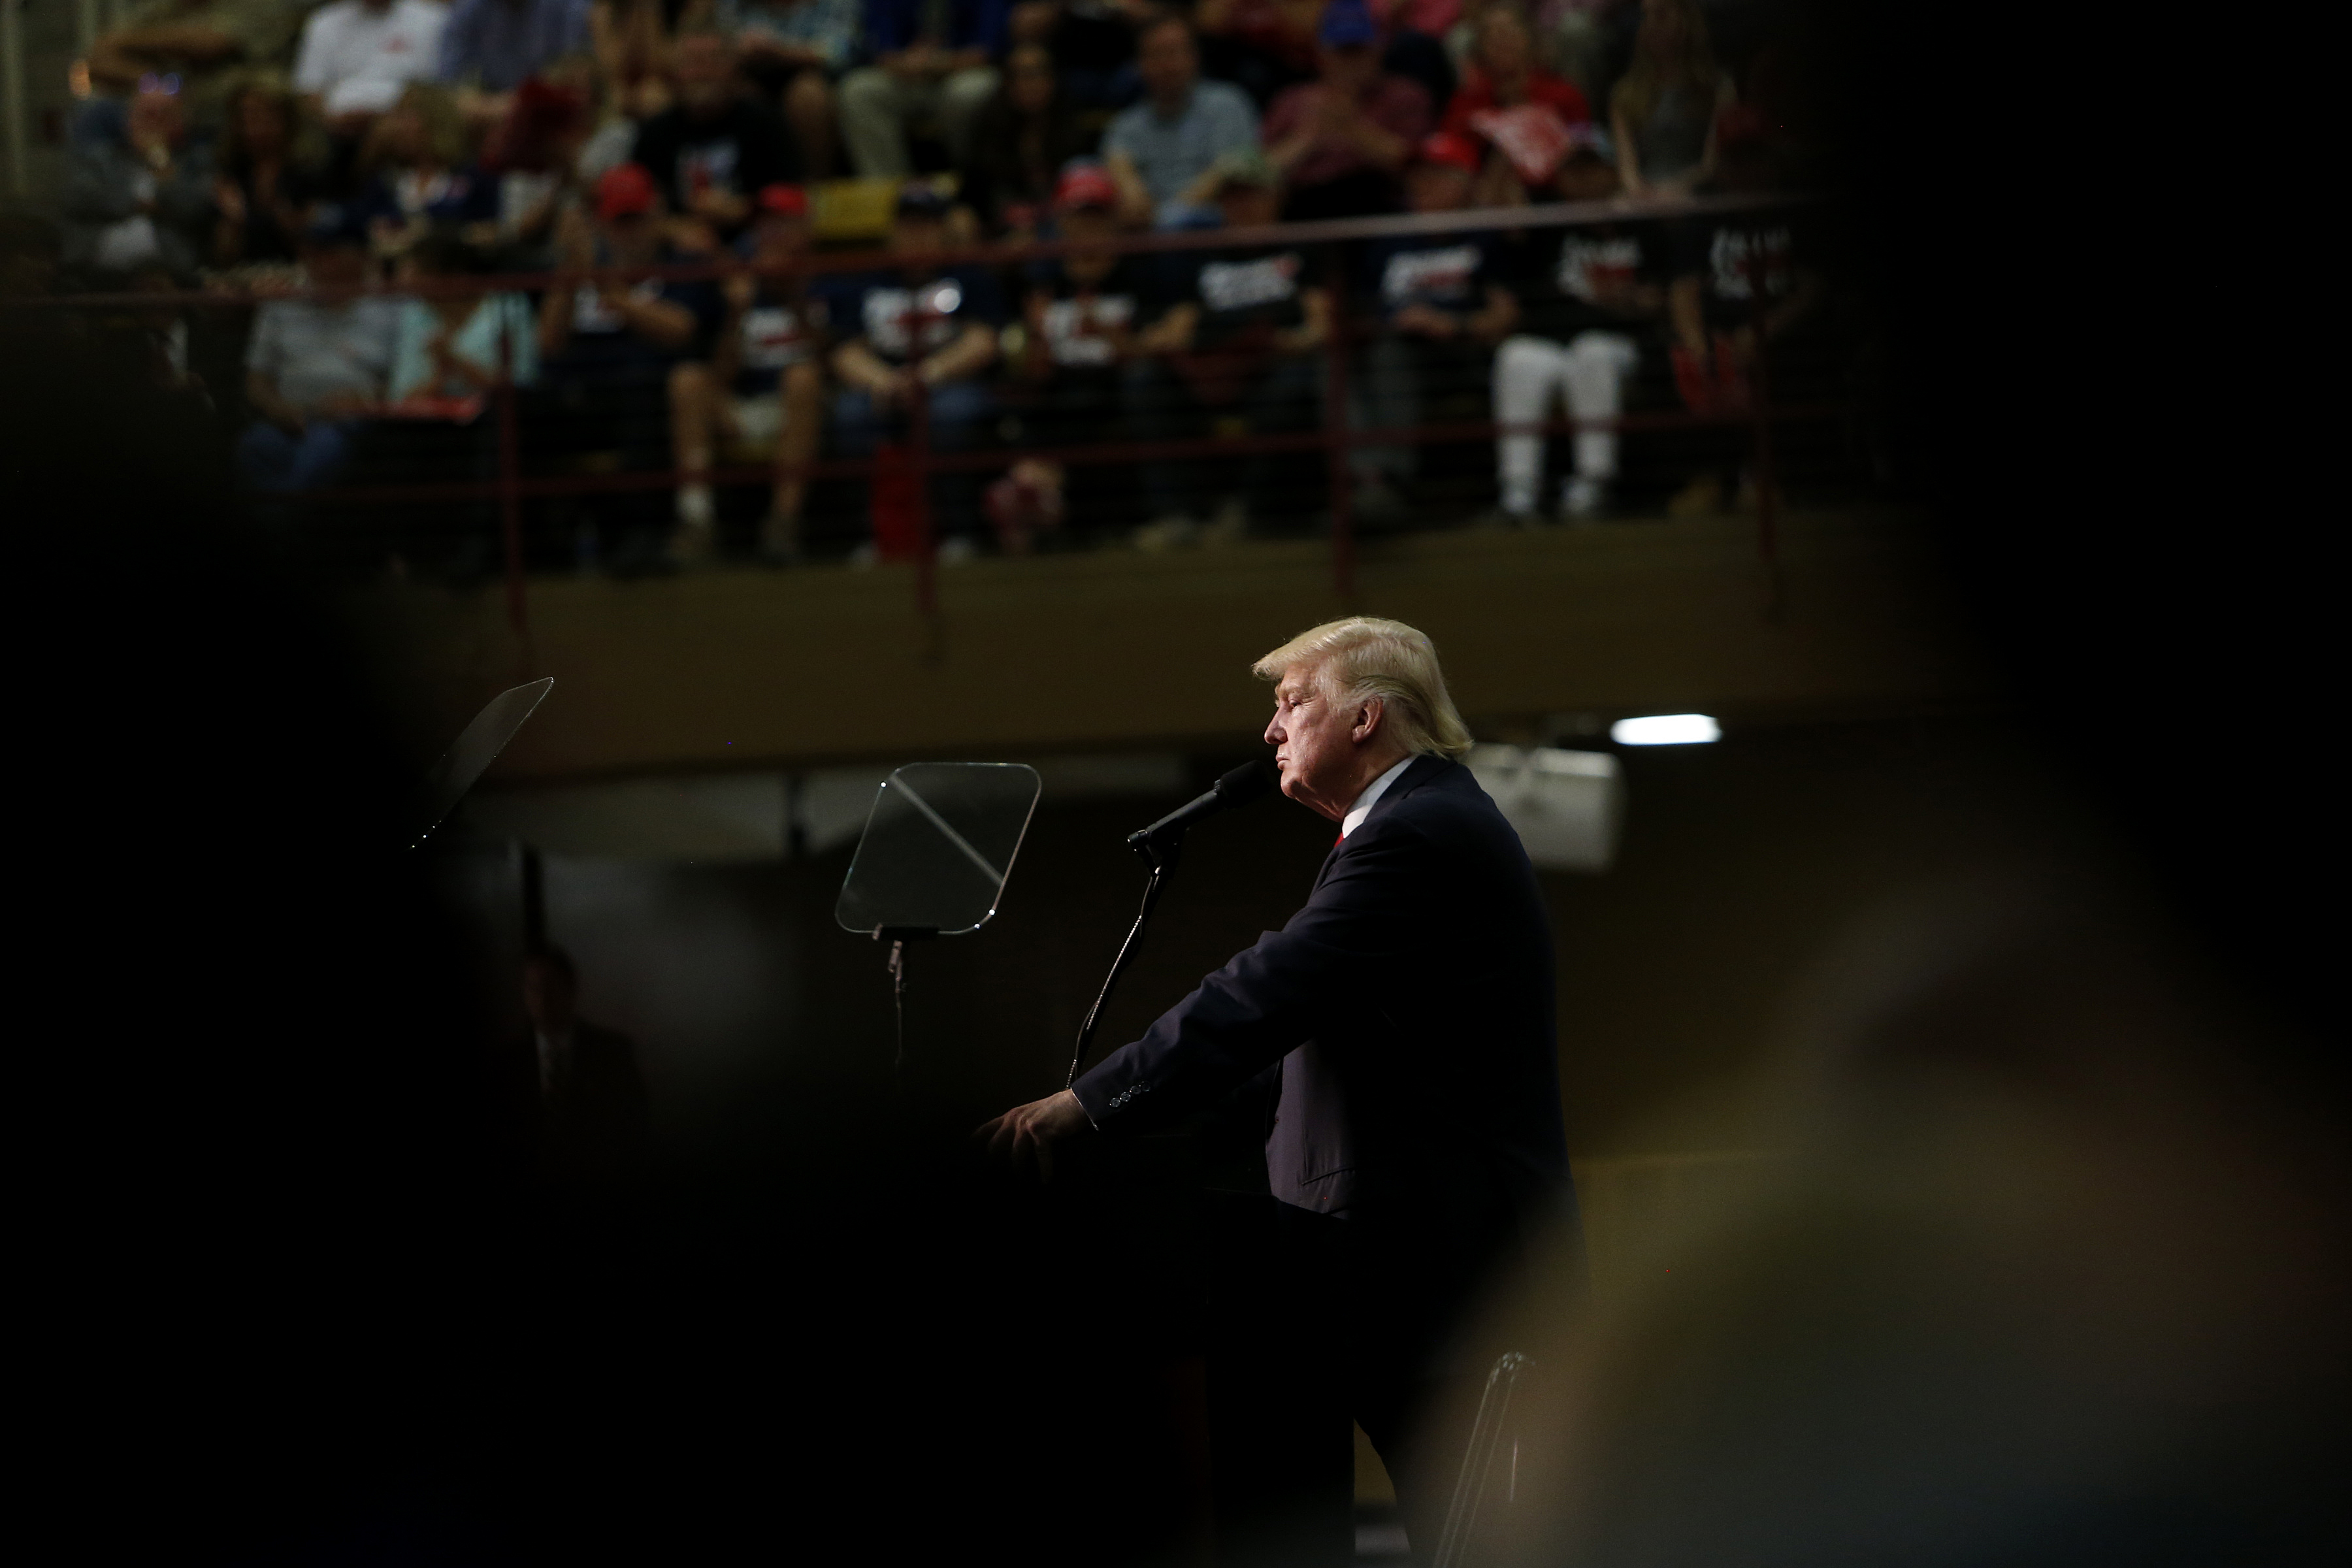 Republican presidential candidate Donald Trump speaks to supporters at a rally at U.S. Cellular Center in Asheville, N.C., on Sept. 12, 2016.